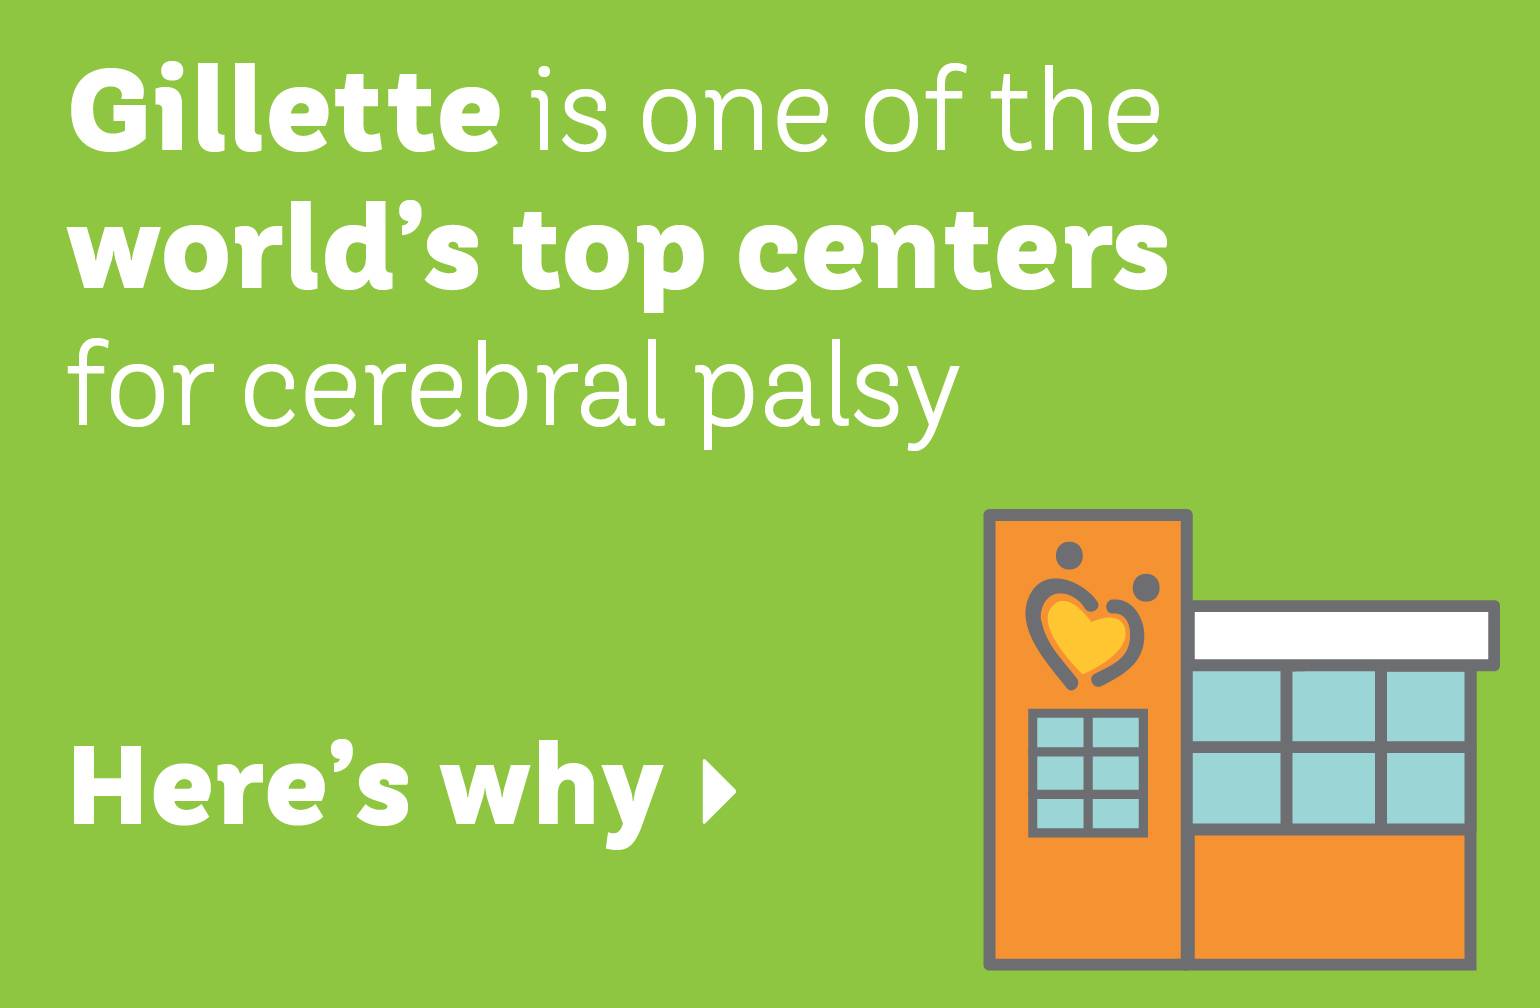 Gillette is one of the world's top centers for cerebral palsy